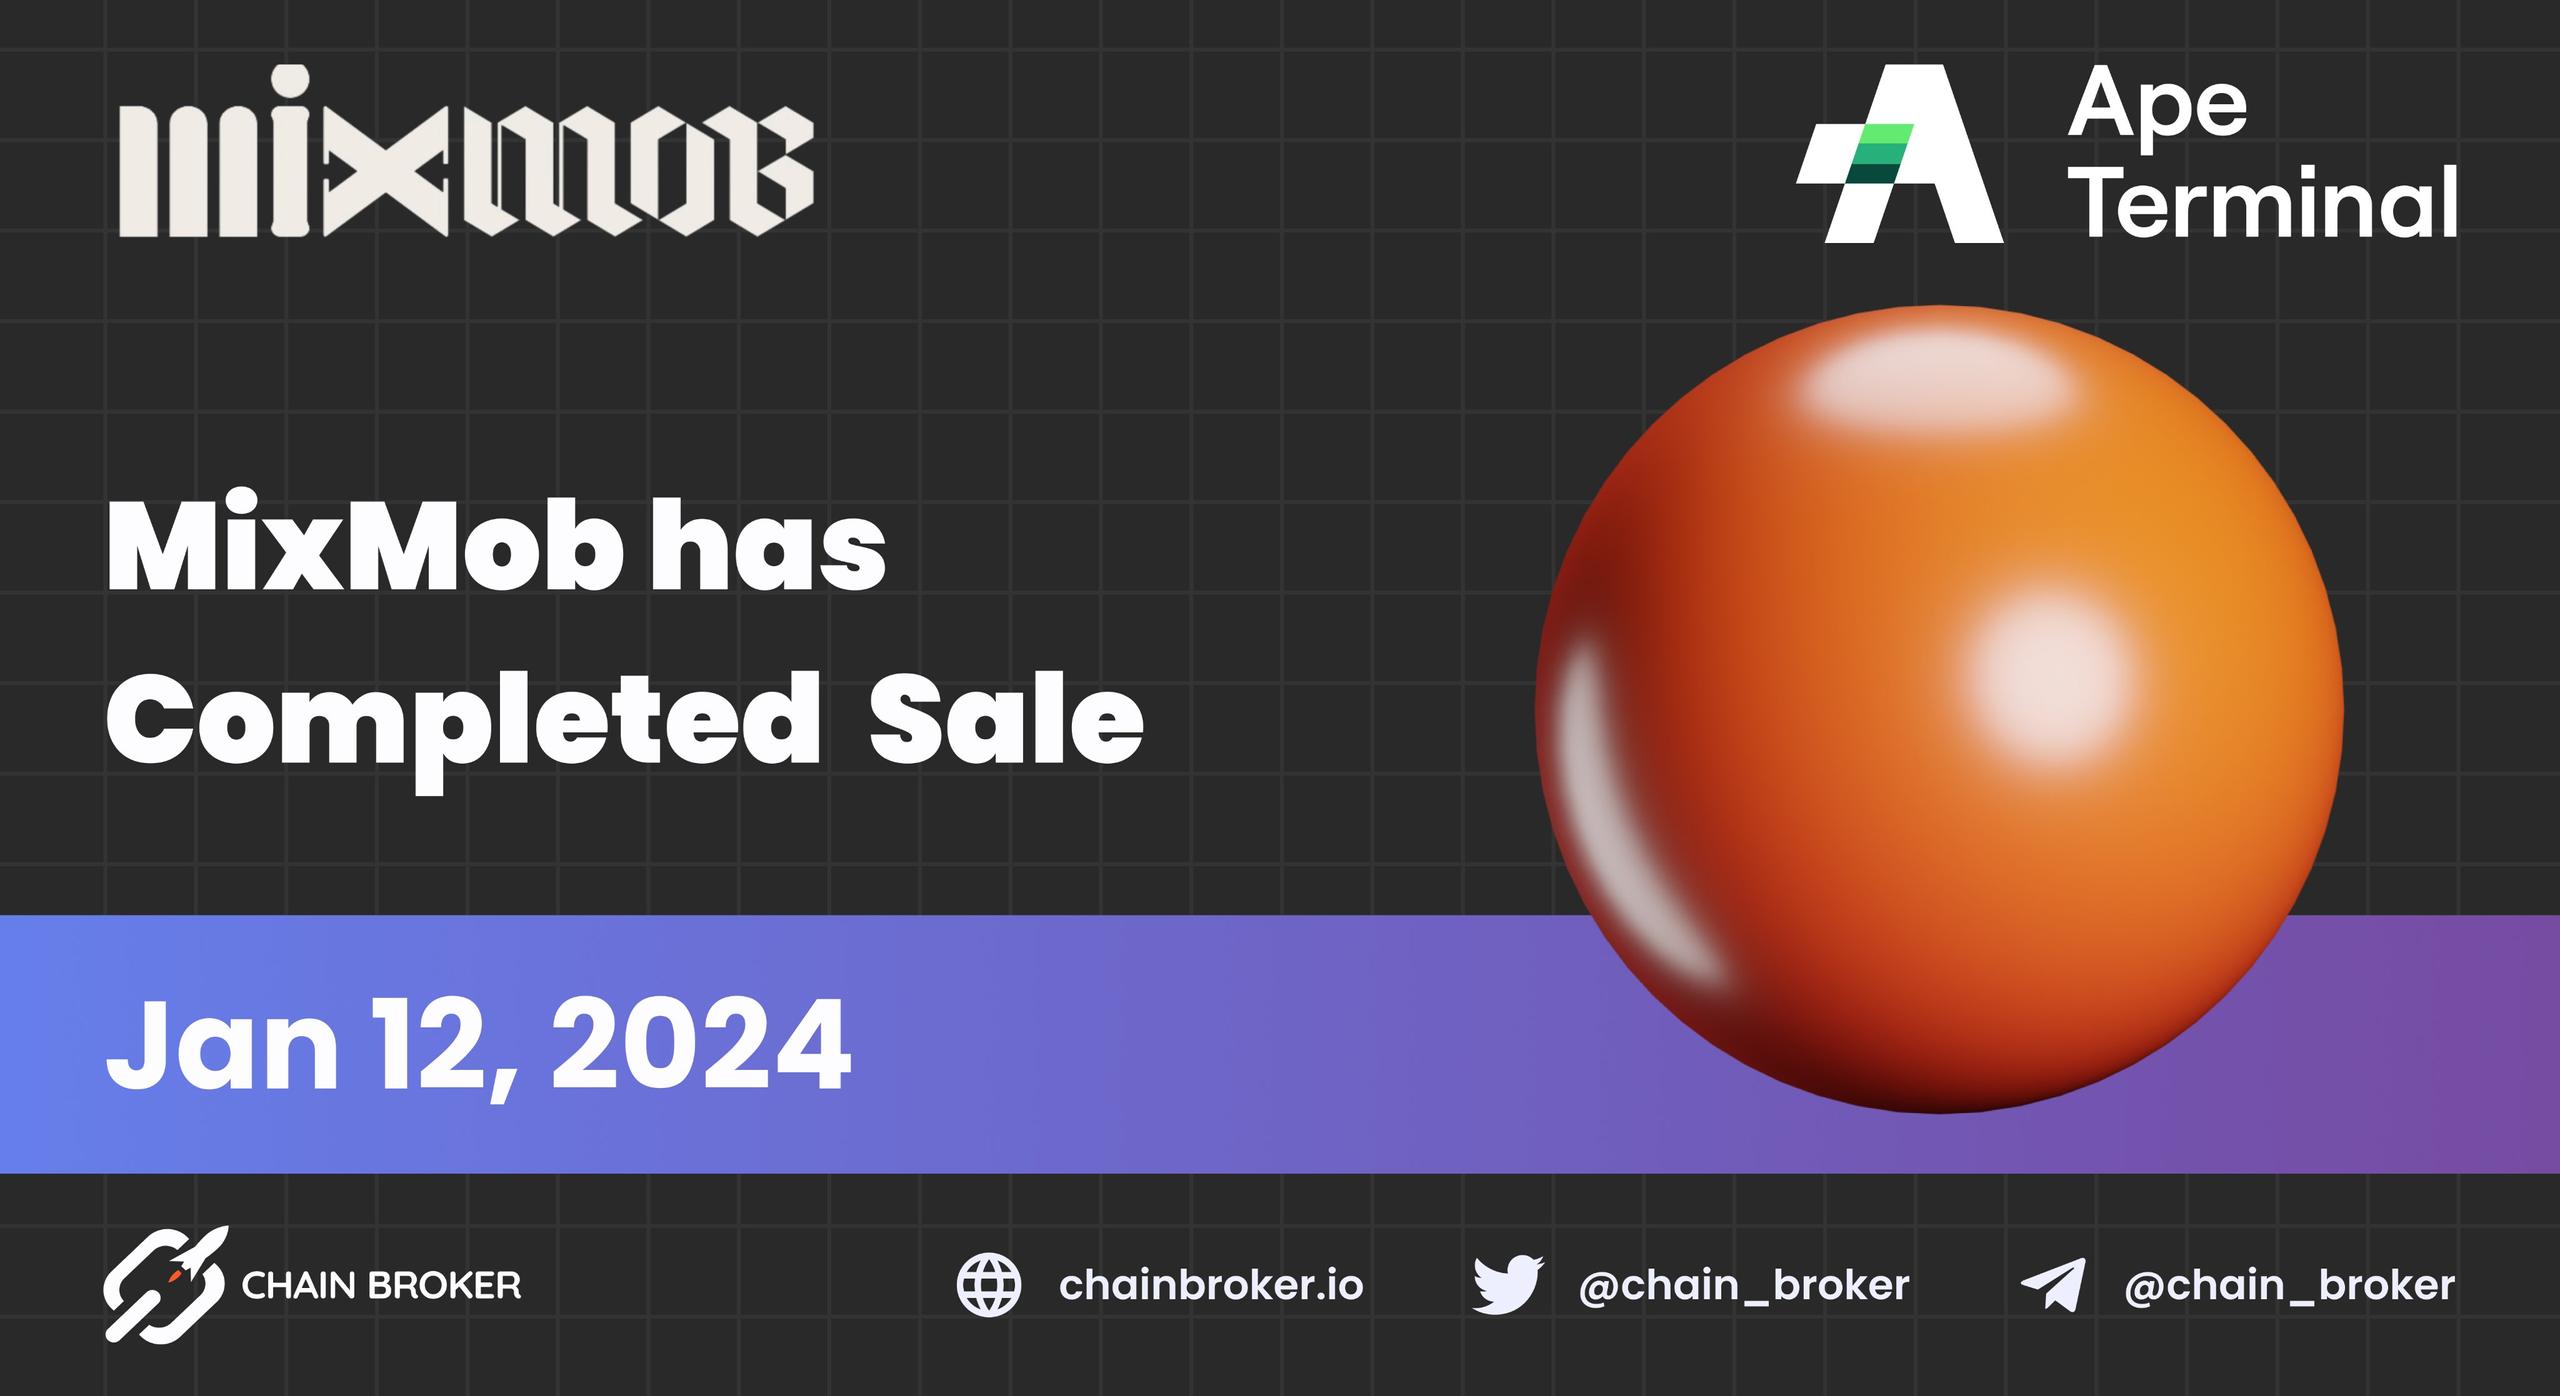 MixMob has completed its Sale on Ape Terminal